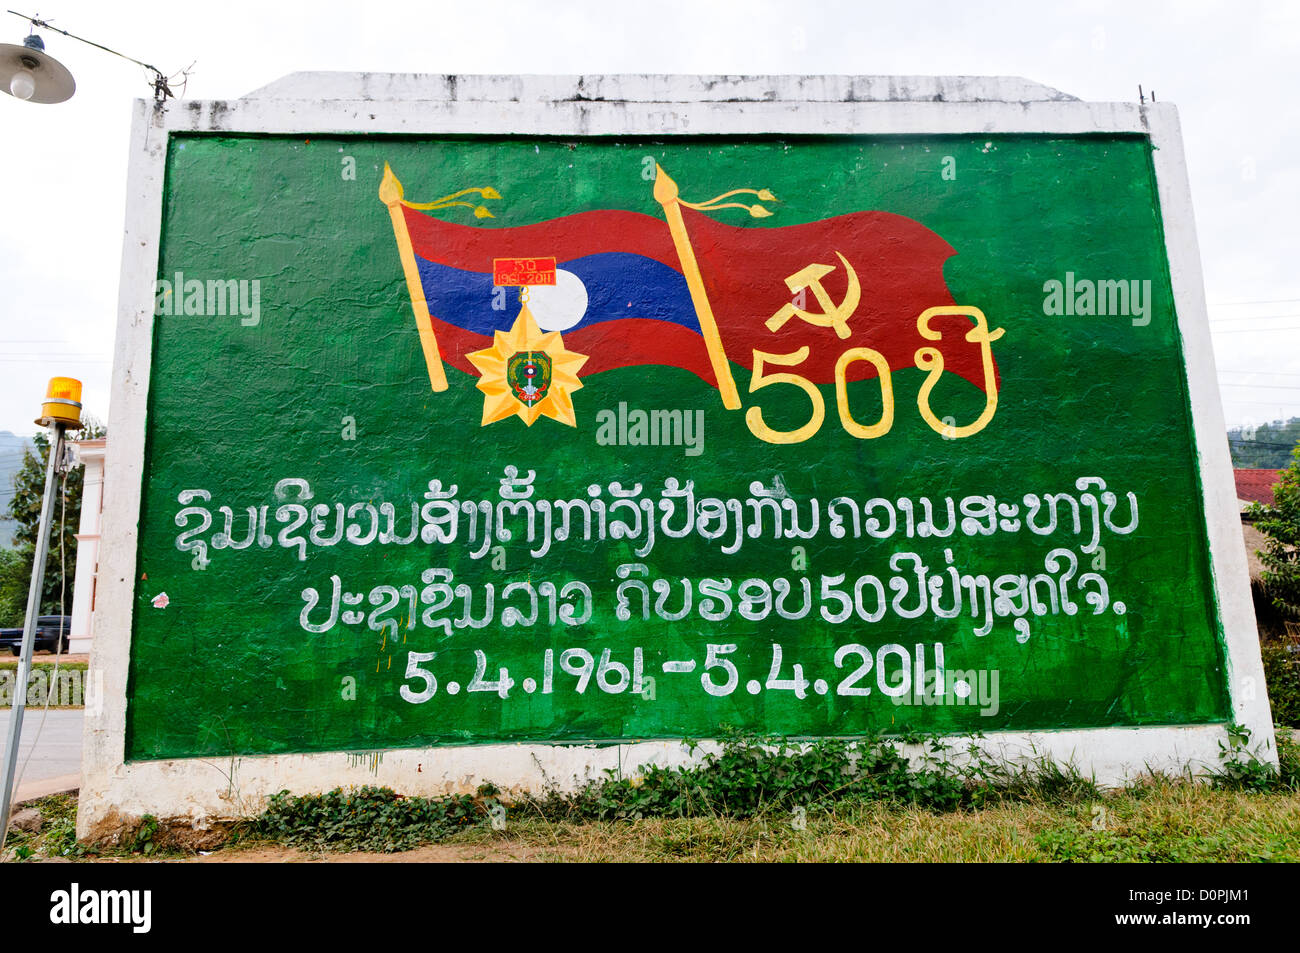 LUANG NAMTHA, Laos - Signs commemorating the 50th anniversary of the establishment of the Lao police force. The sign is in Luang Namtha province in northern Laos. Stock Photo